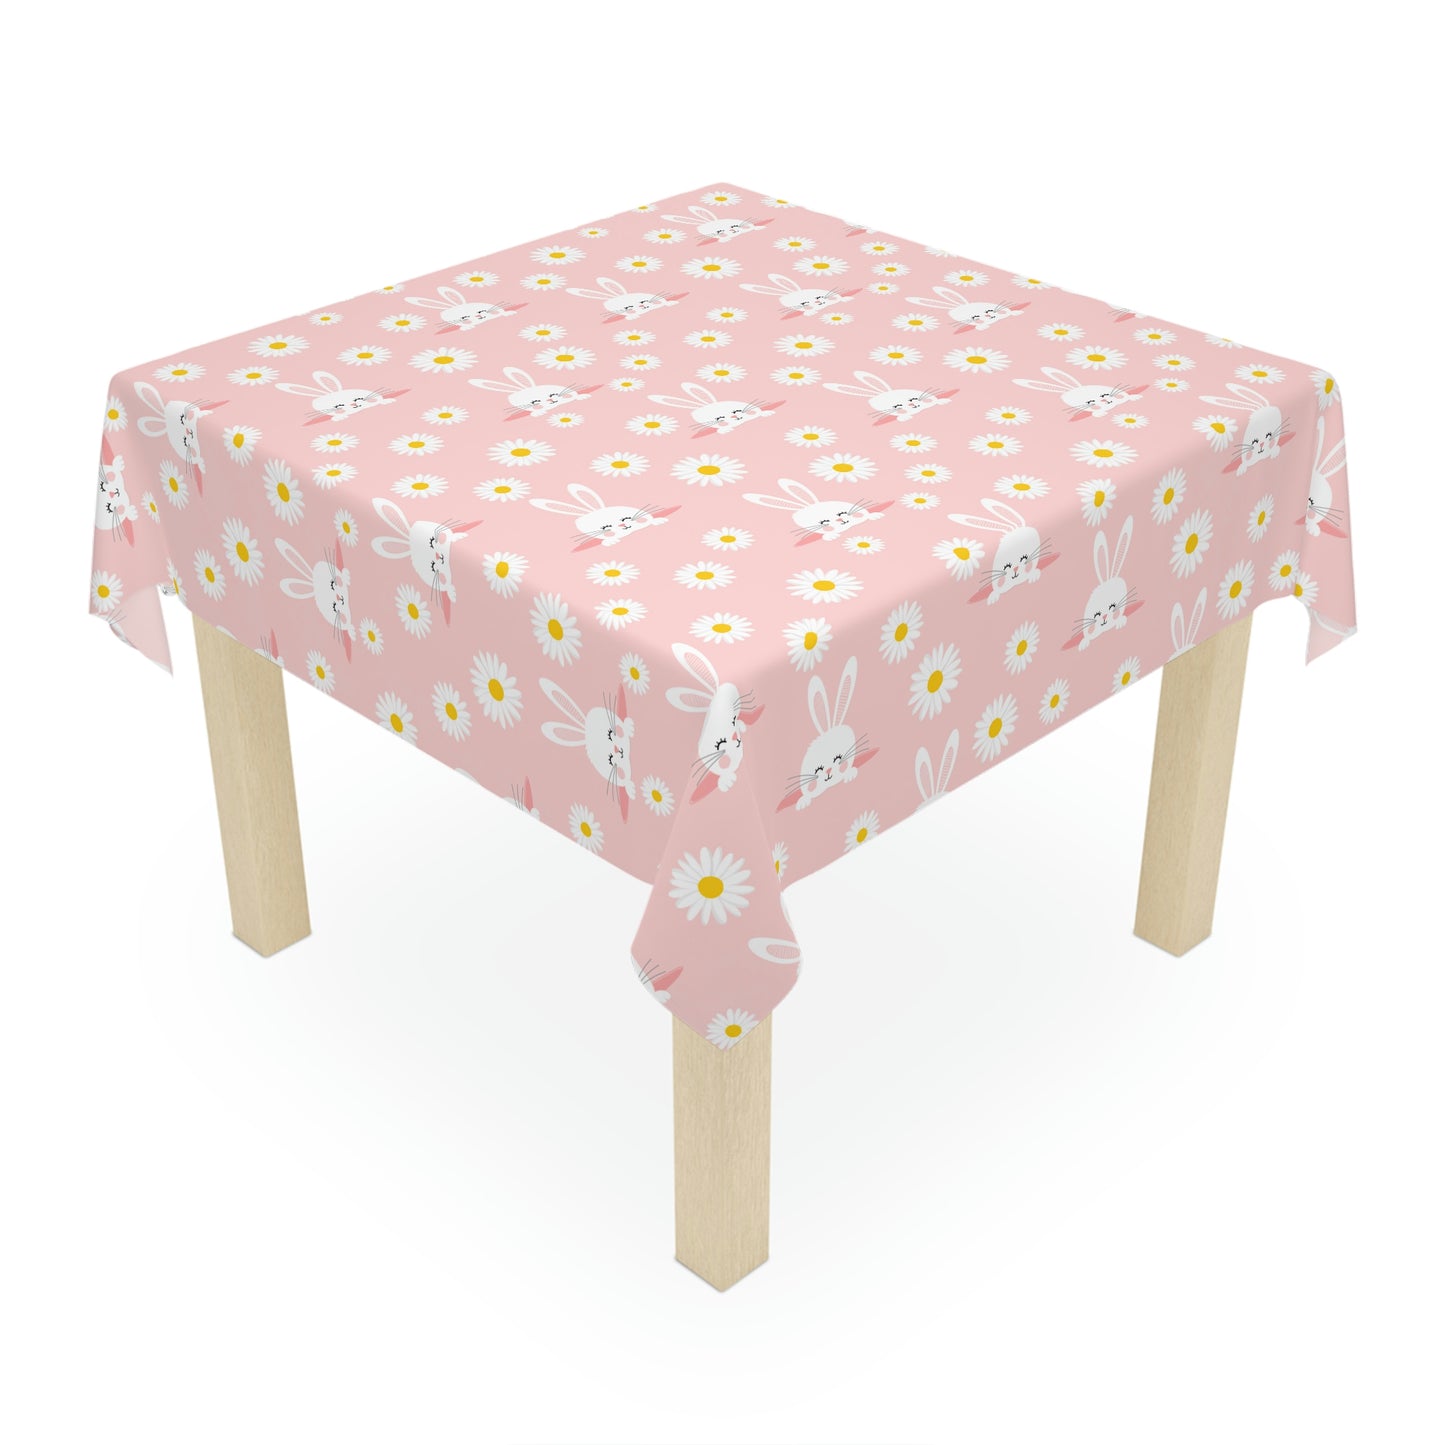 Smiling Bunnies and Daisies Table Cloth